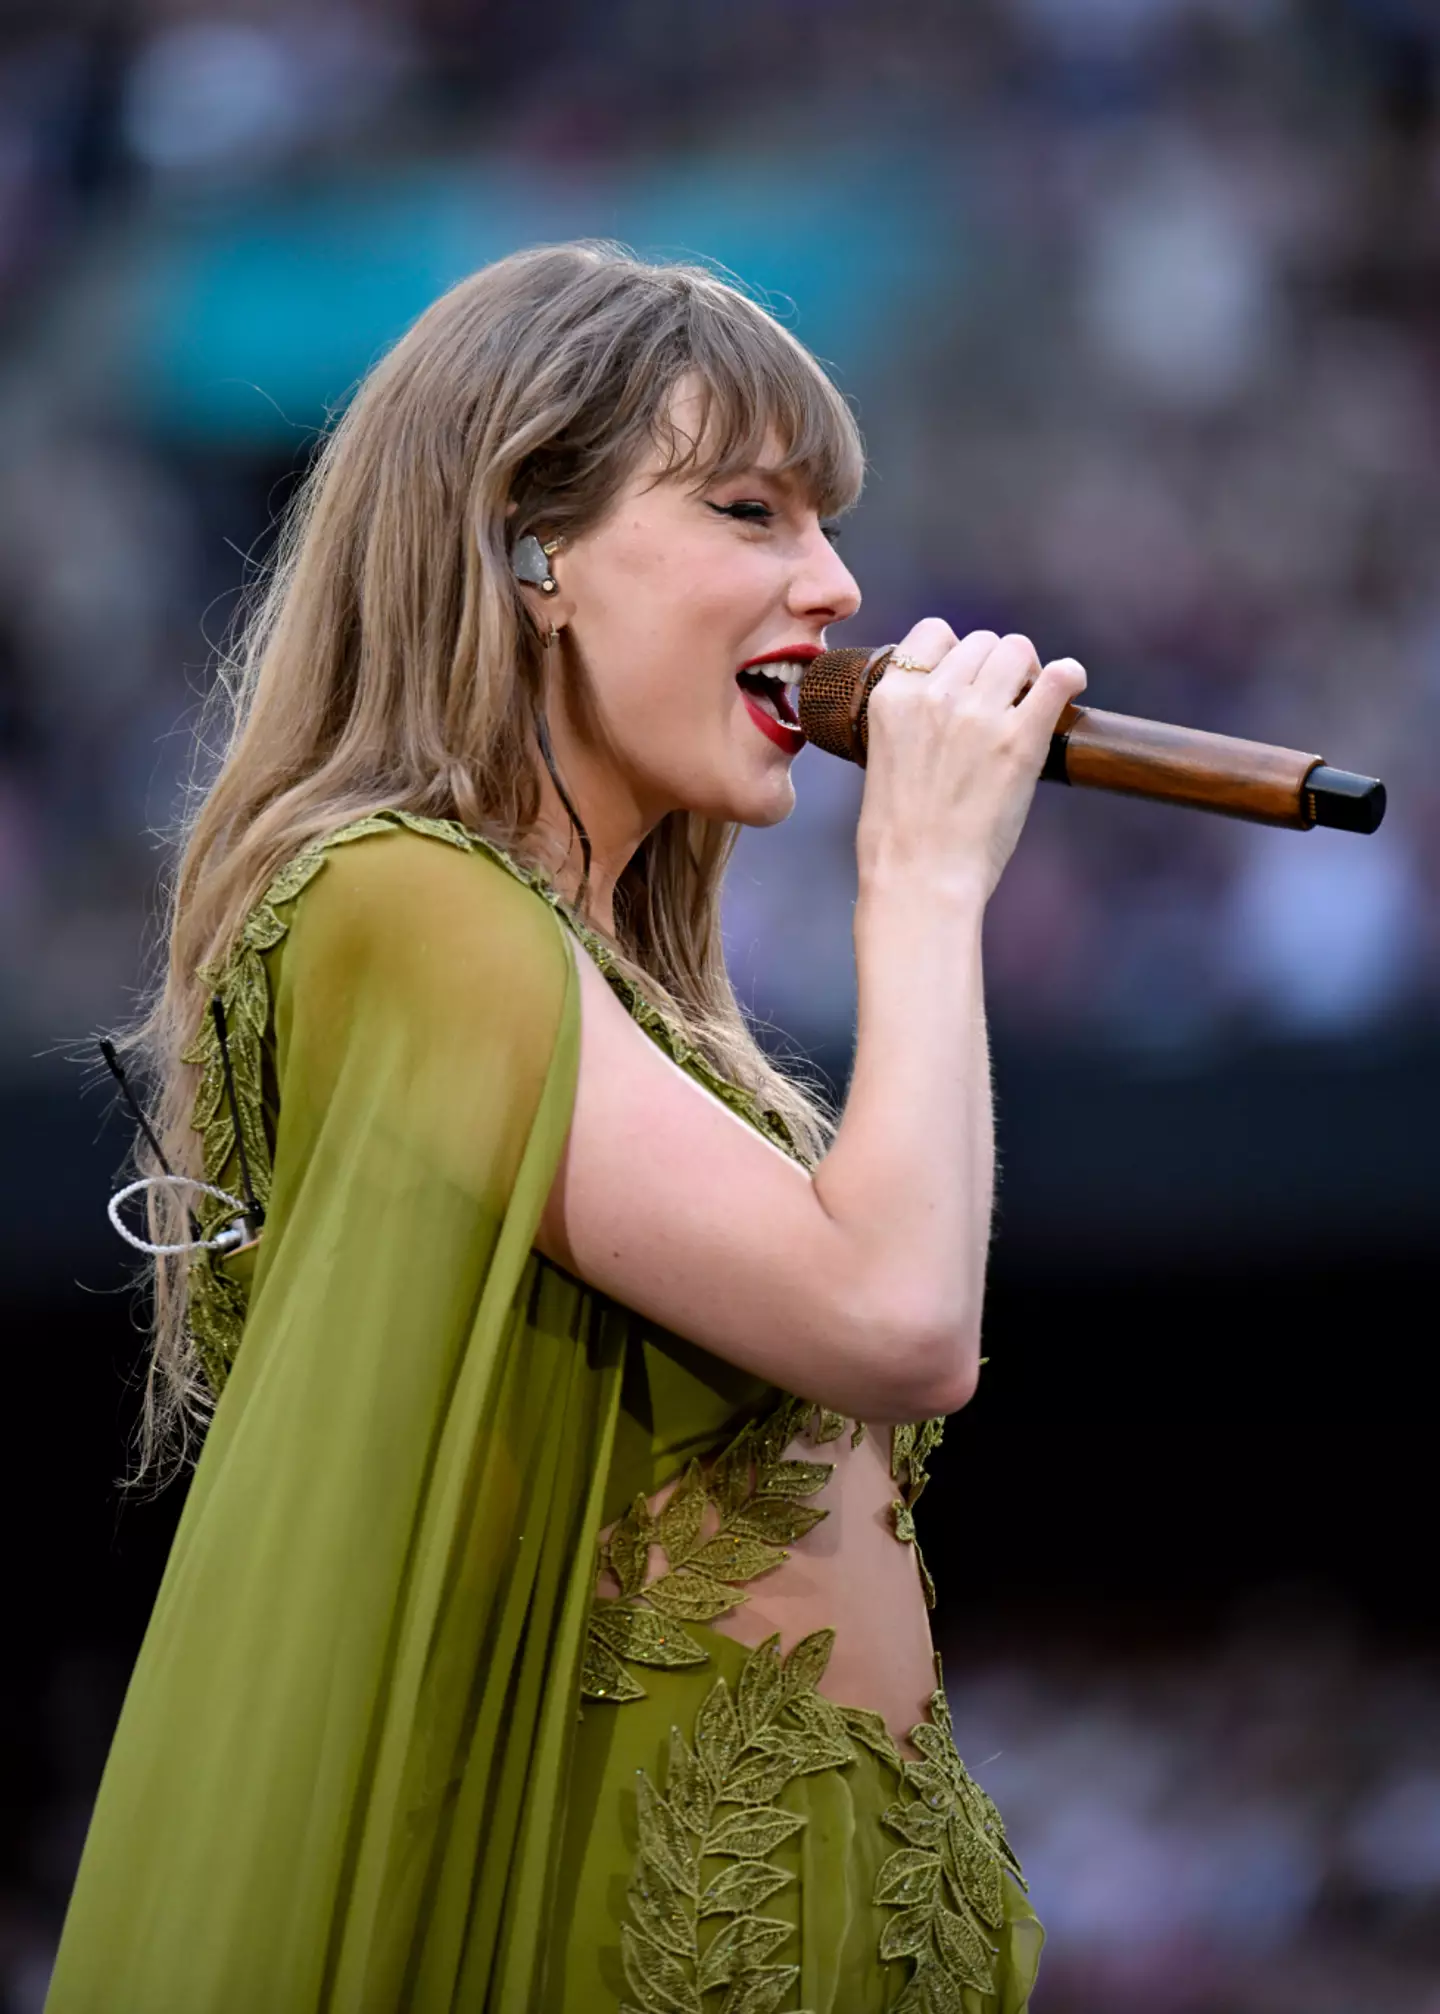 Fans praised Swift for keeping it 'classy' (Gareth Cattermole/TAS24/Getty Images for TAS Rights Management)